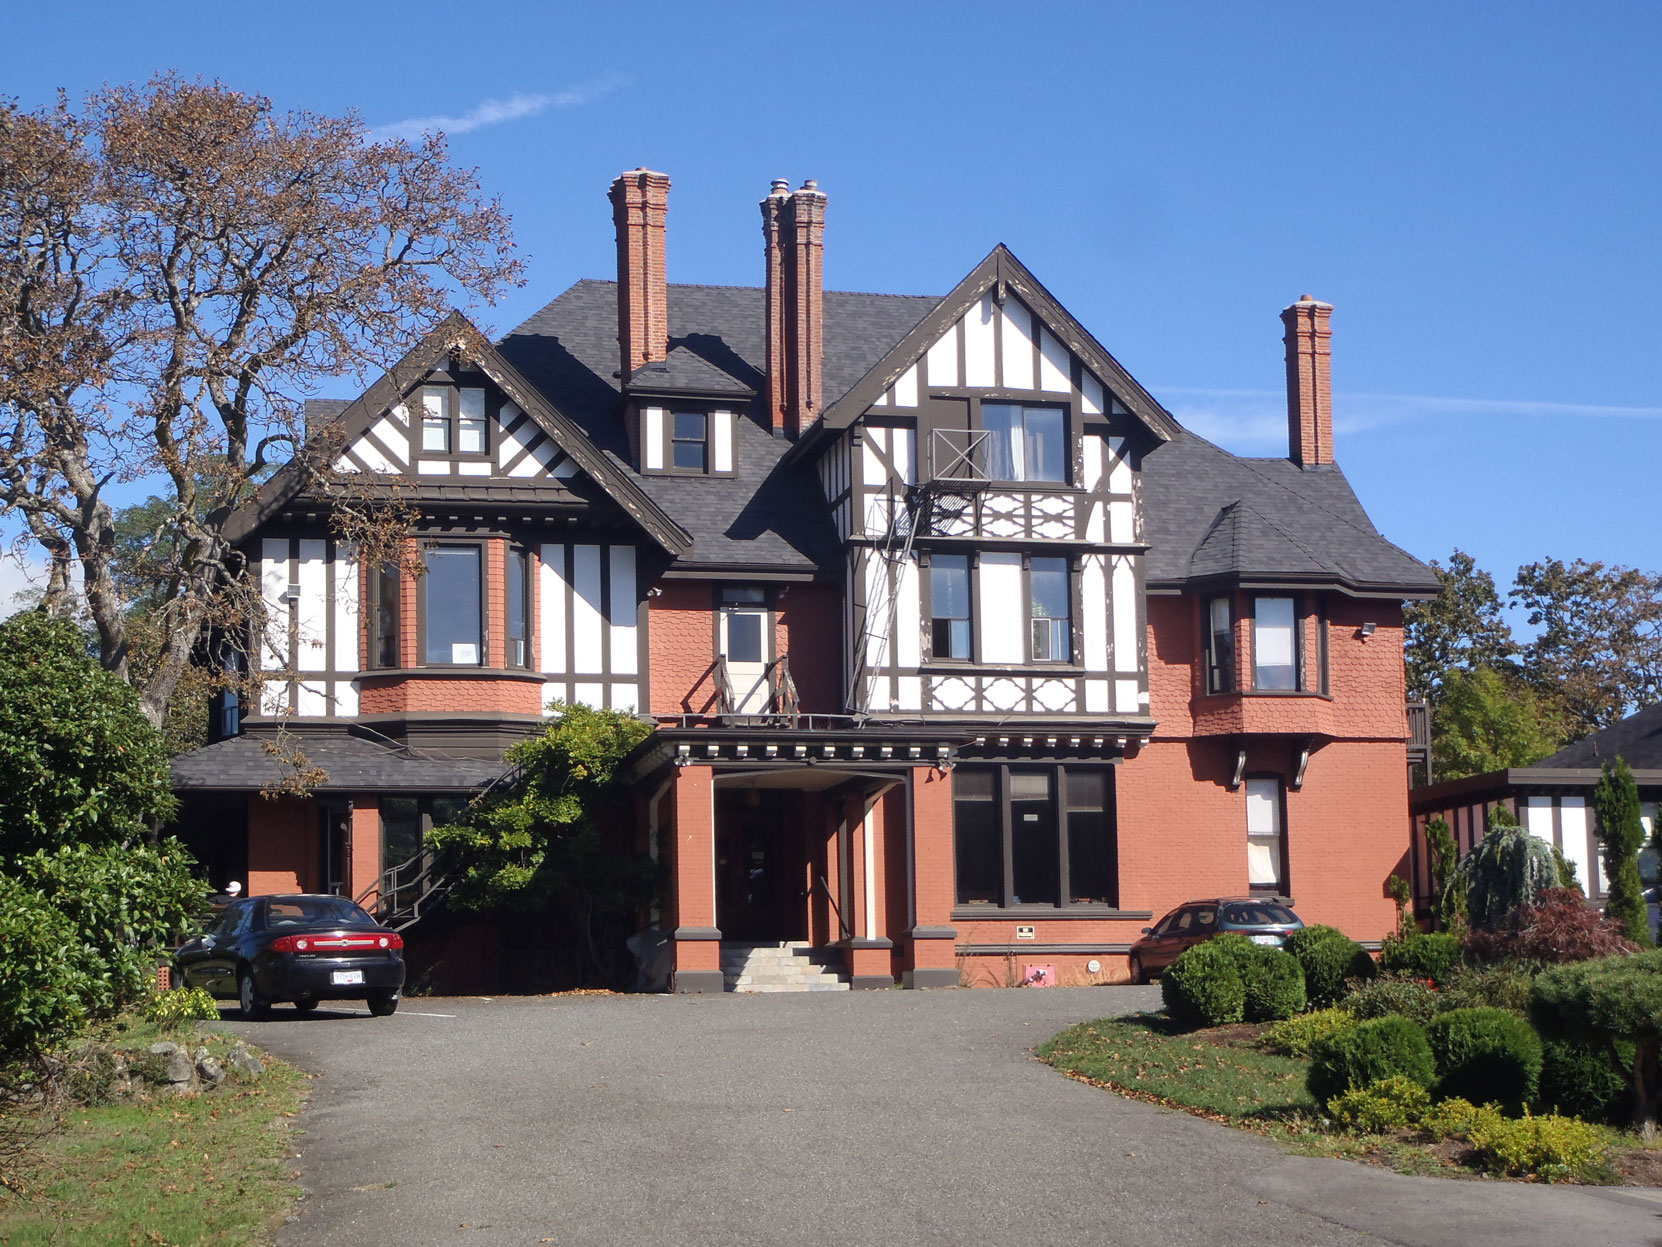 1322 Rockland Avenue was the Agnew family home between 1912 and 1950. Kathleen Agnew donated it the Anglican Church in 1950. (photo: Mark Anderson)